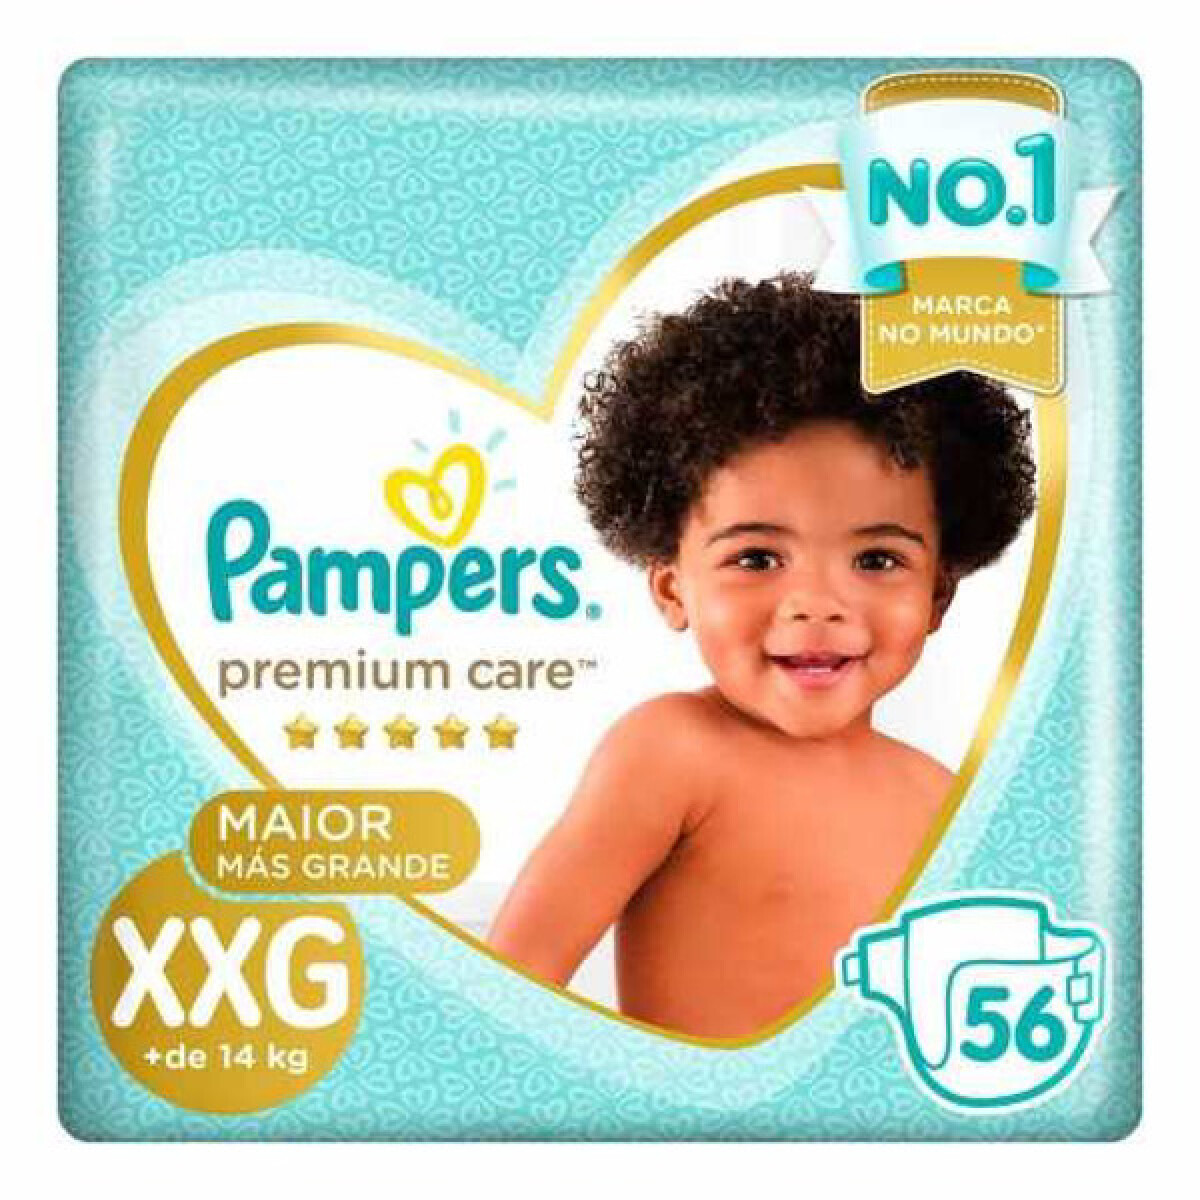 Pañales Pampers Premium Care XXG X56 